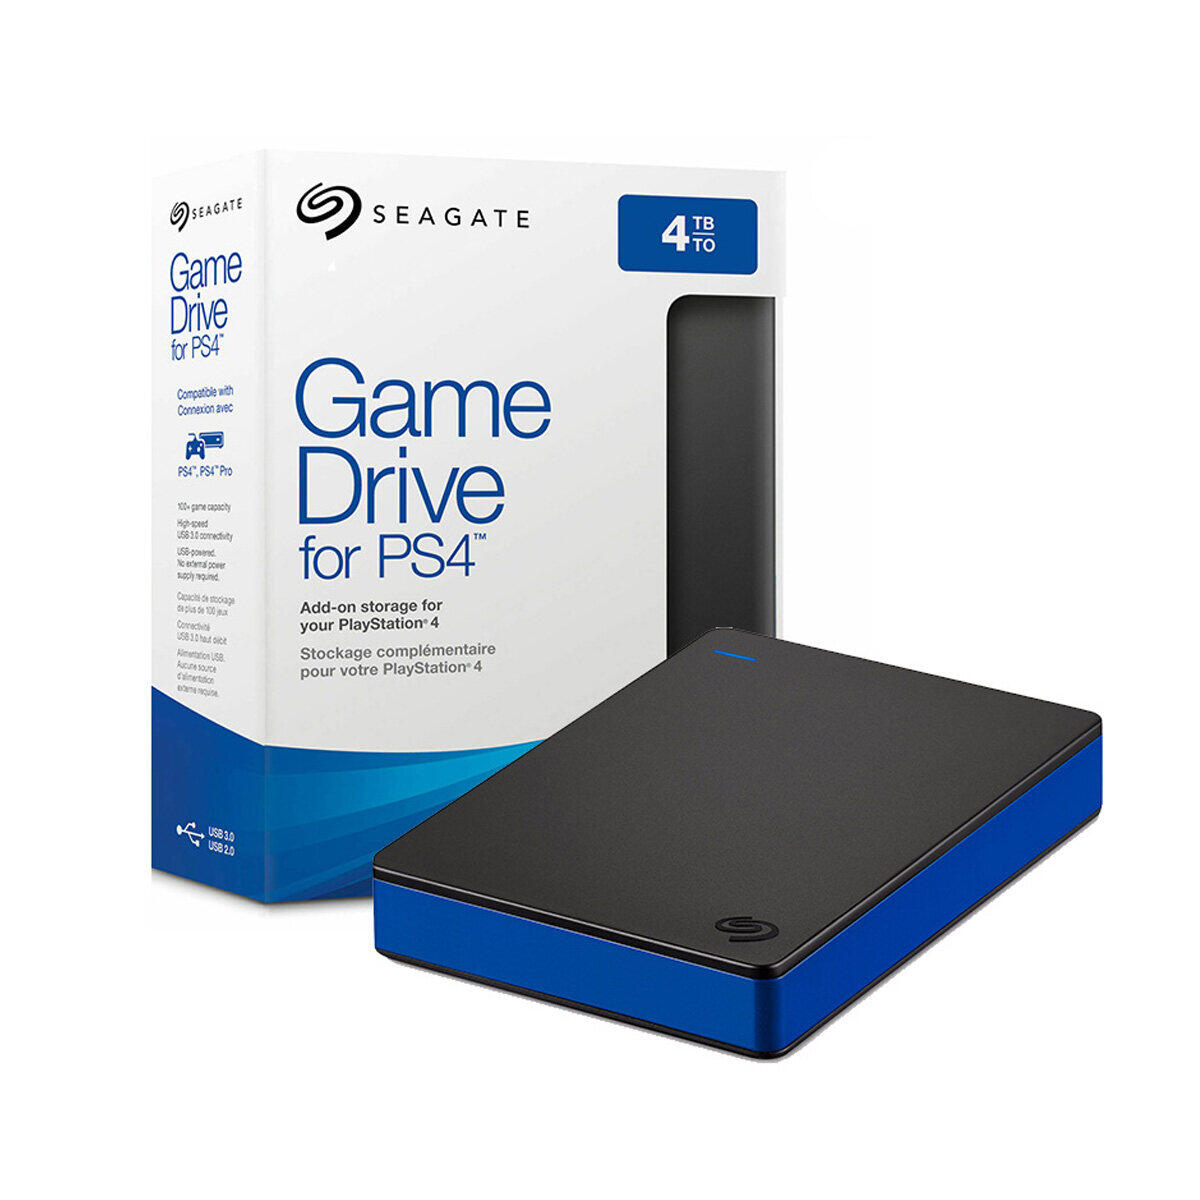 Seagate Game Drive 2TB / 4TB For PS4 / PS4 Pro with USB 3.0 Connection, Quick Setup, Store Up To 50+ Game